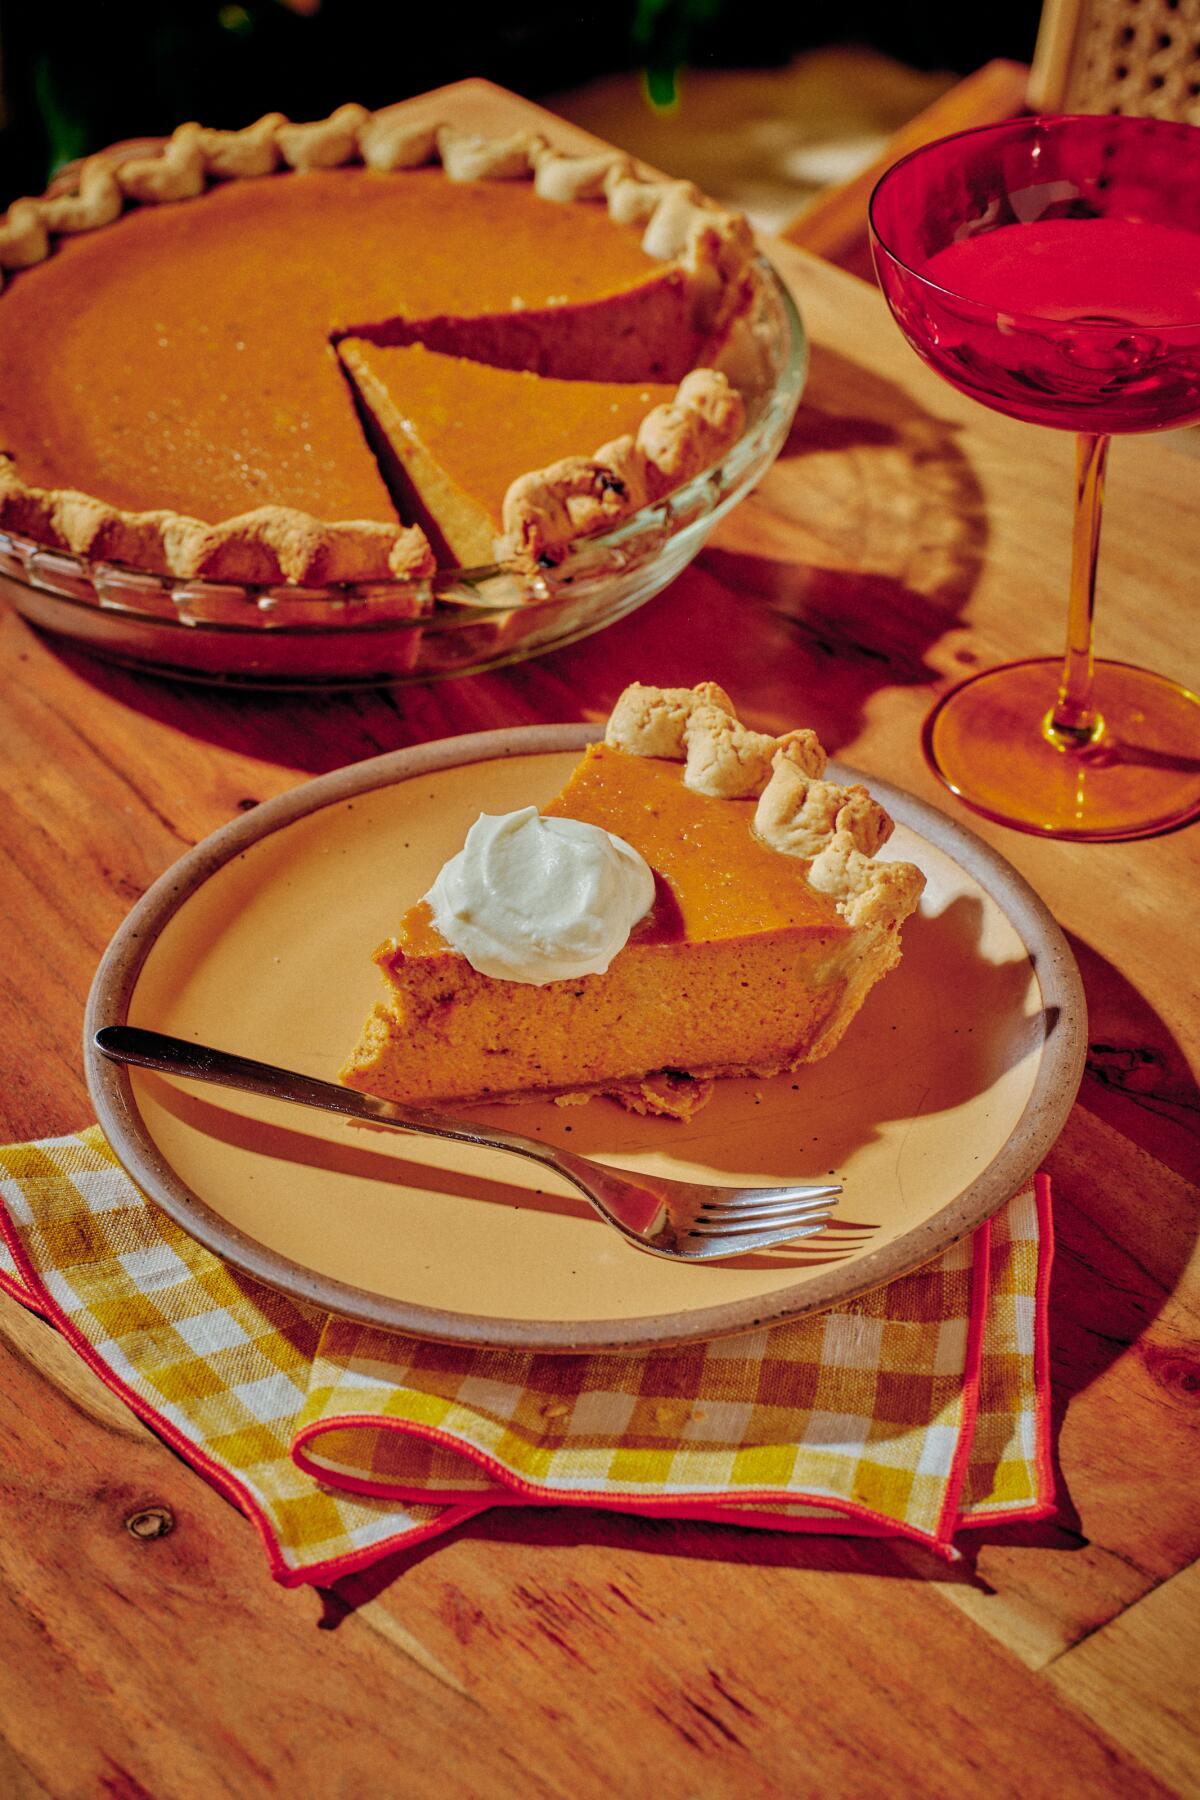 A slice of pumpkin pie with a dollop of whipped cream sits on a plate next to the rest of the whole pie and a glass of wine